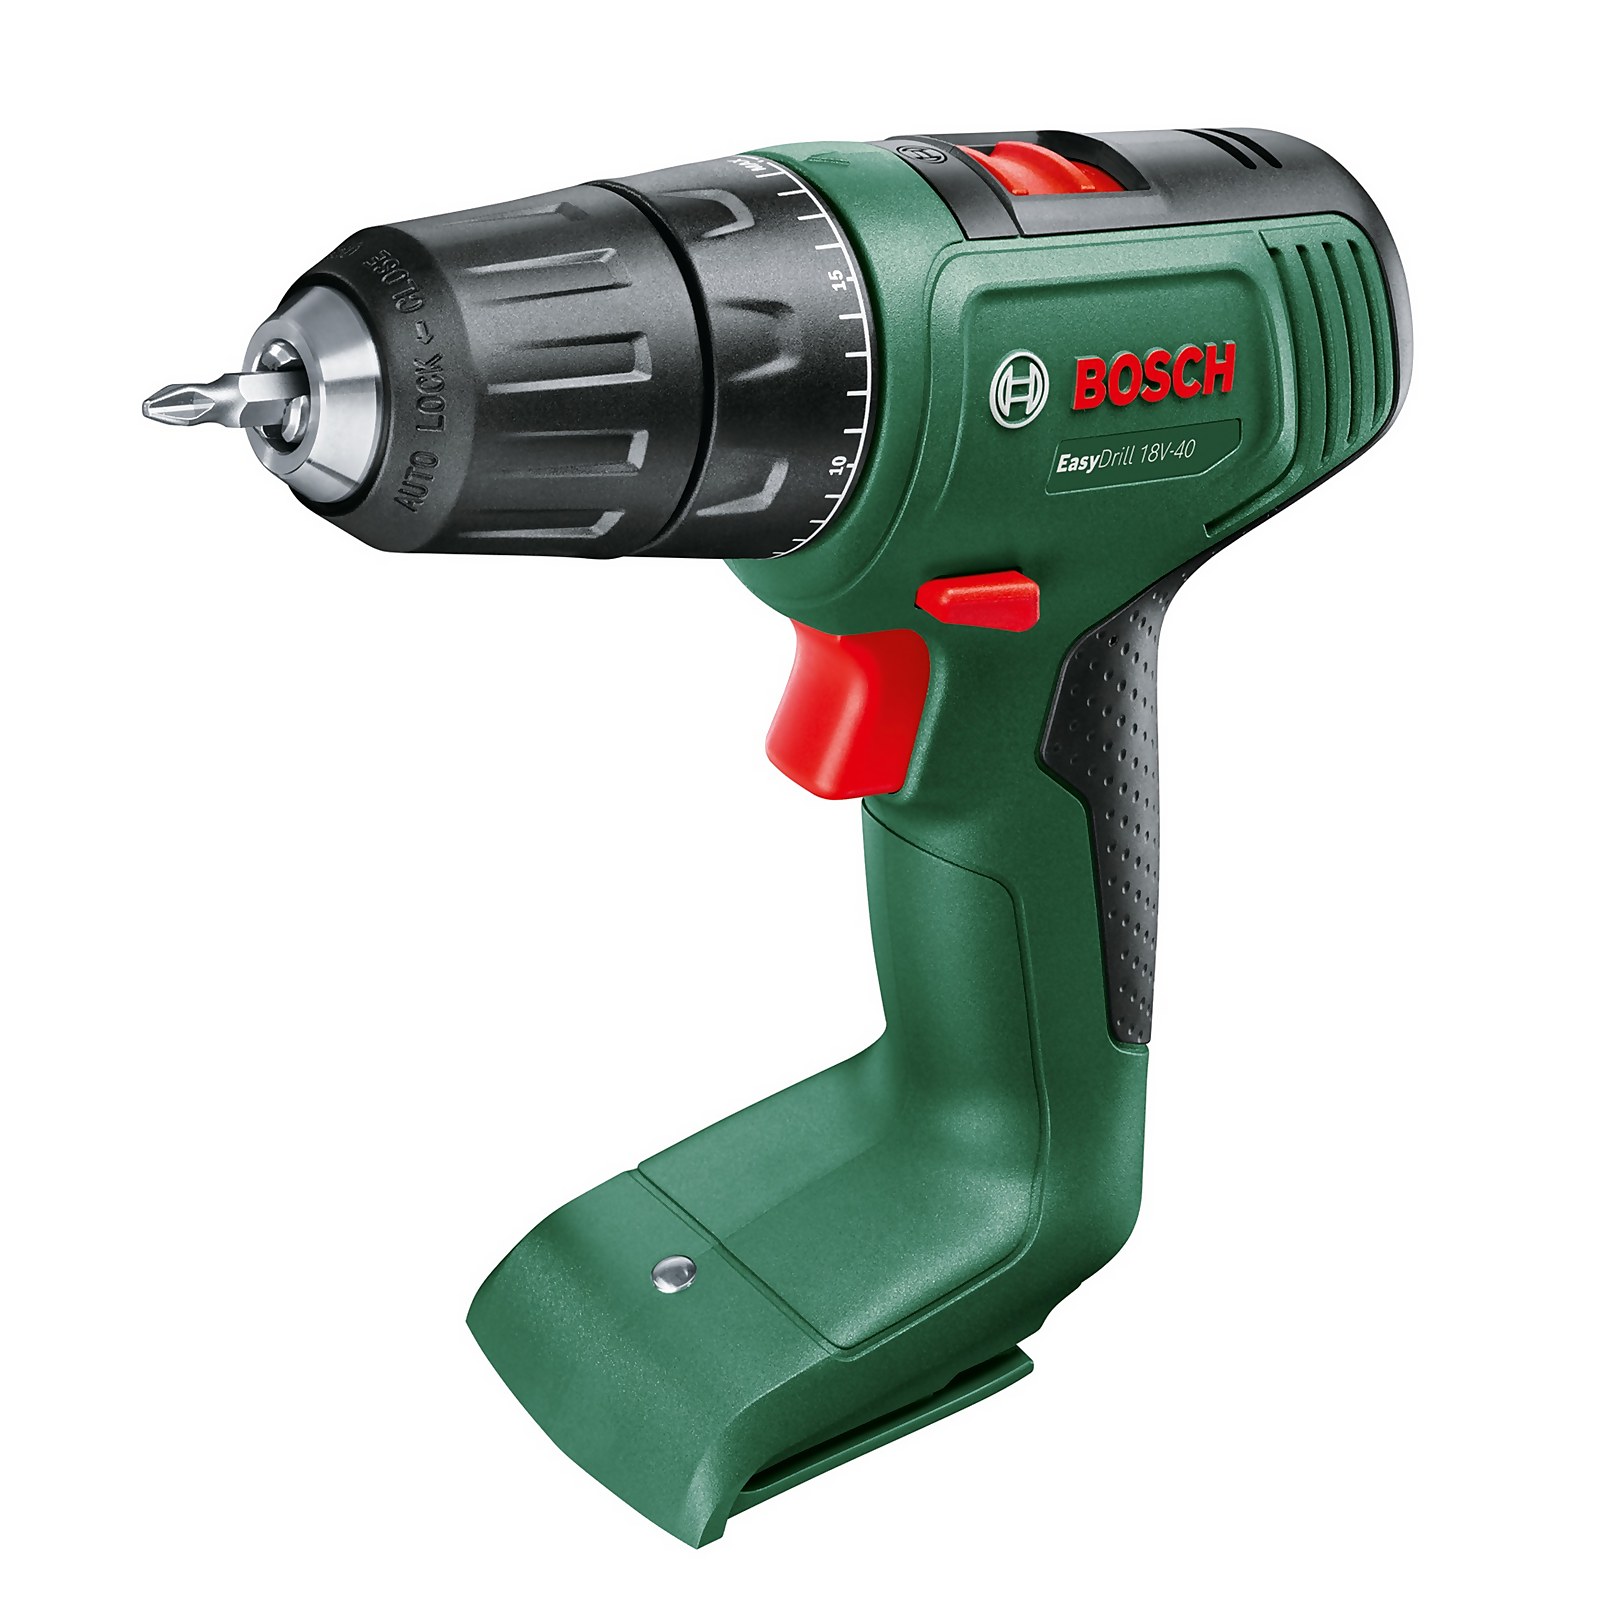 Photo of Bosch Easydrill 18v-40 -no Battery Included-